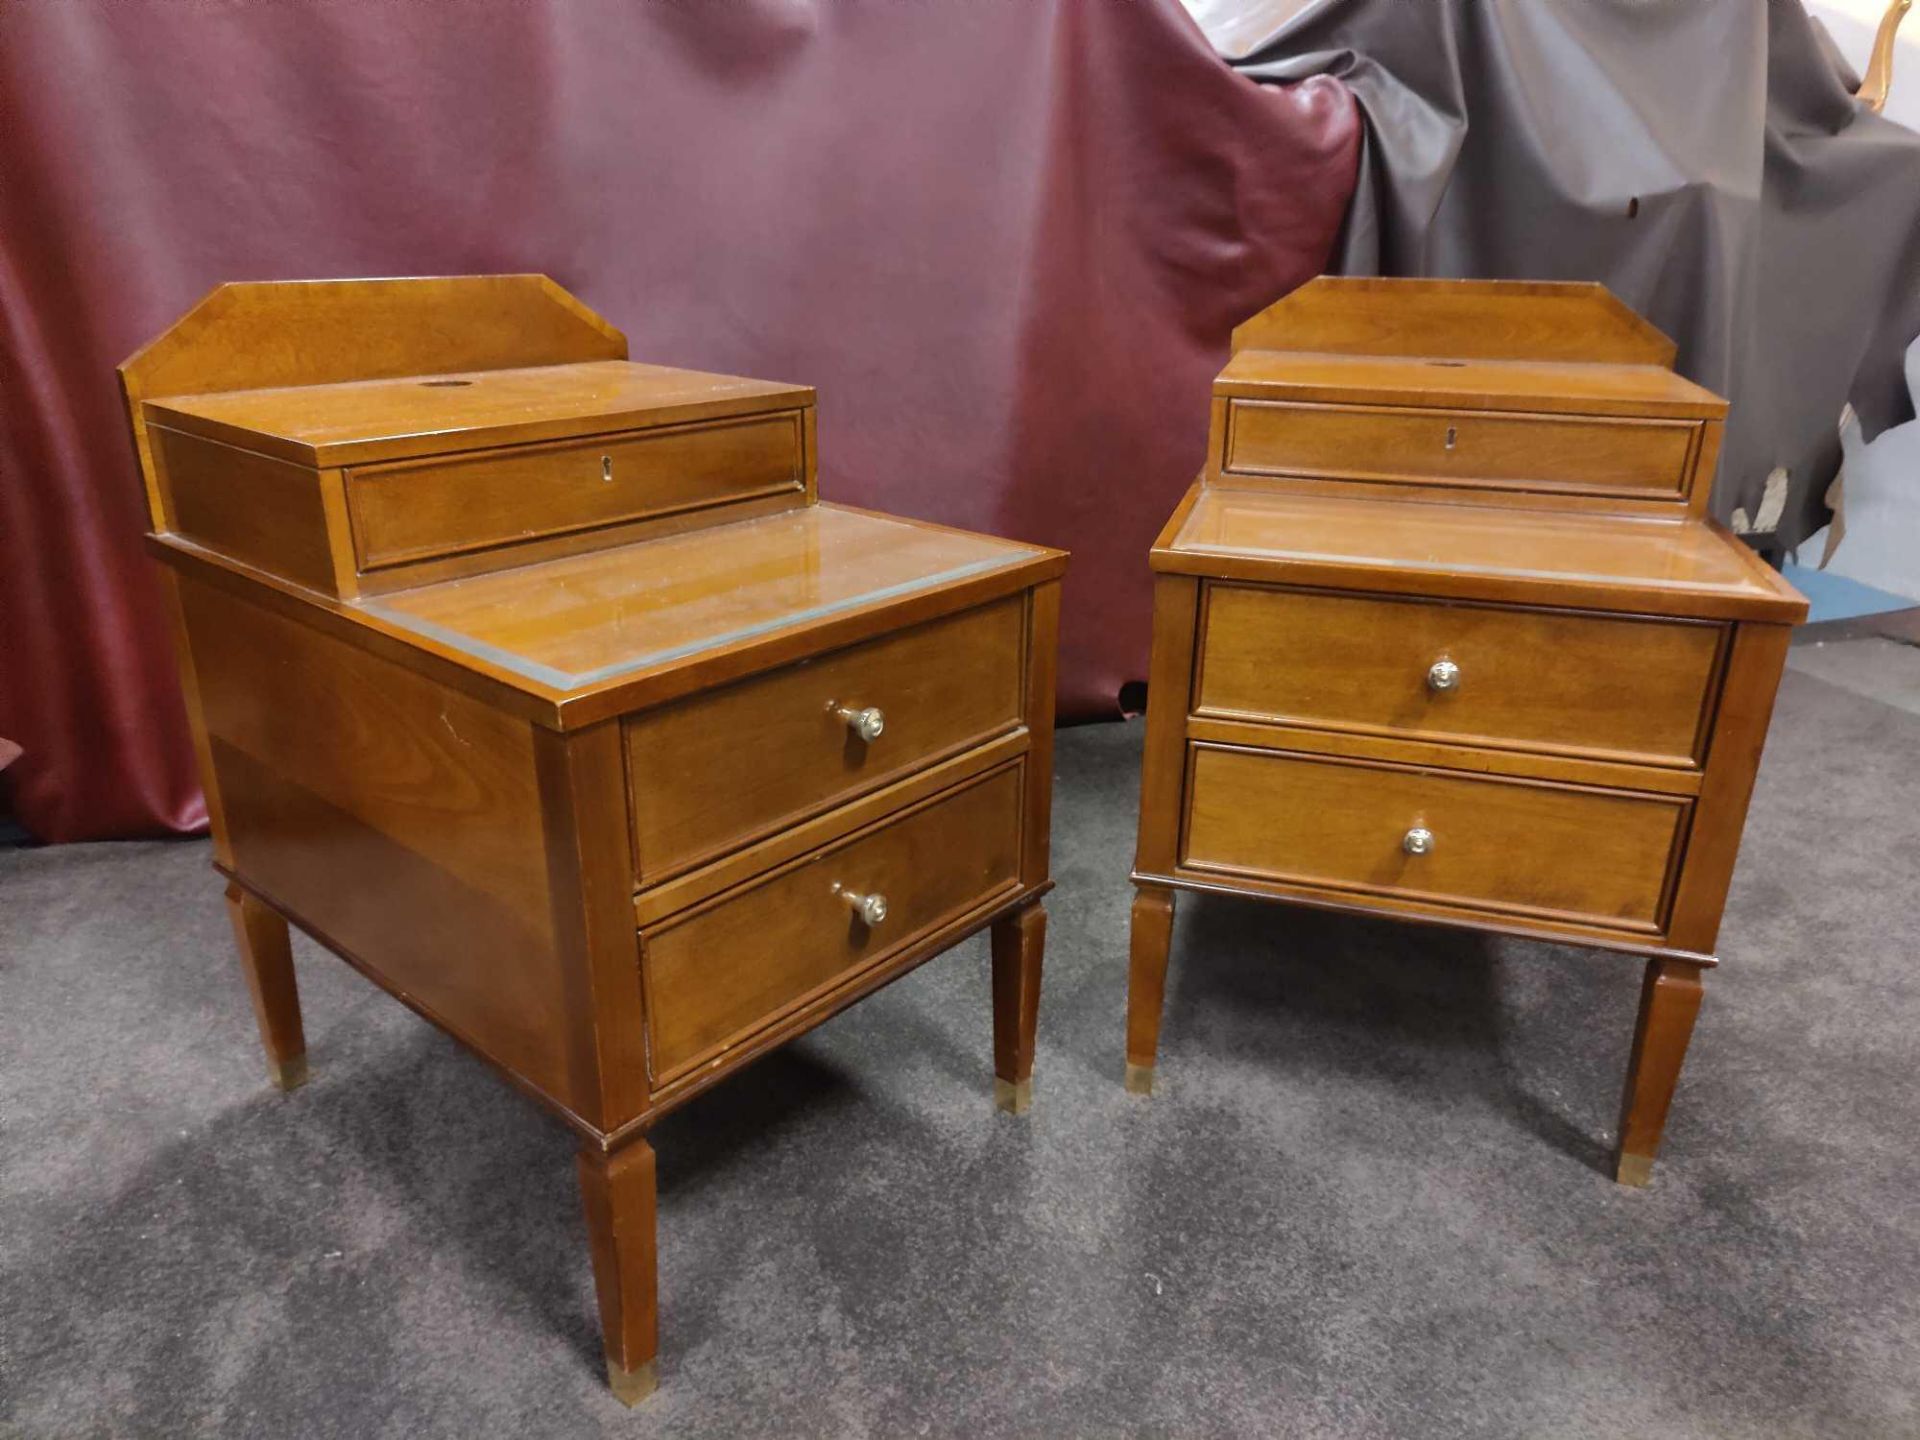 A Pair Of Two Tier Bedside Nightstands With Plate Top With Storage Compartments Mounted On Tapered